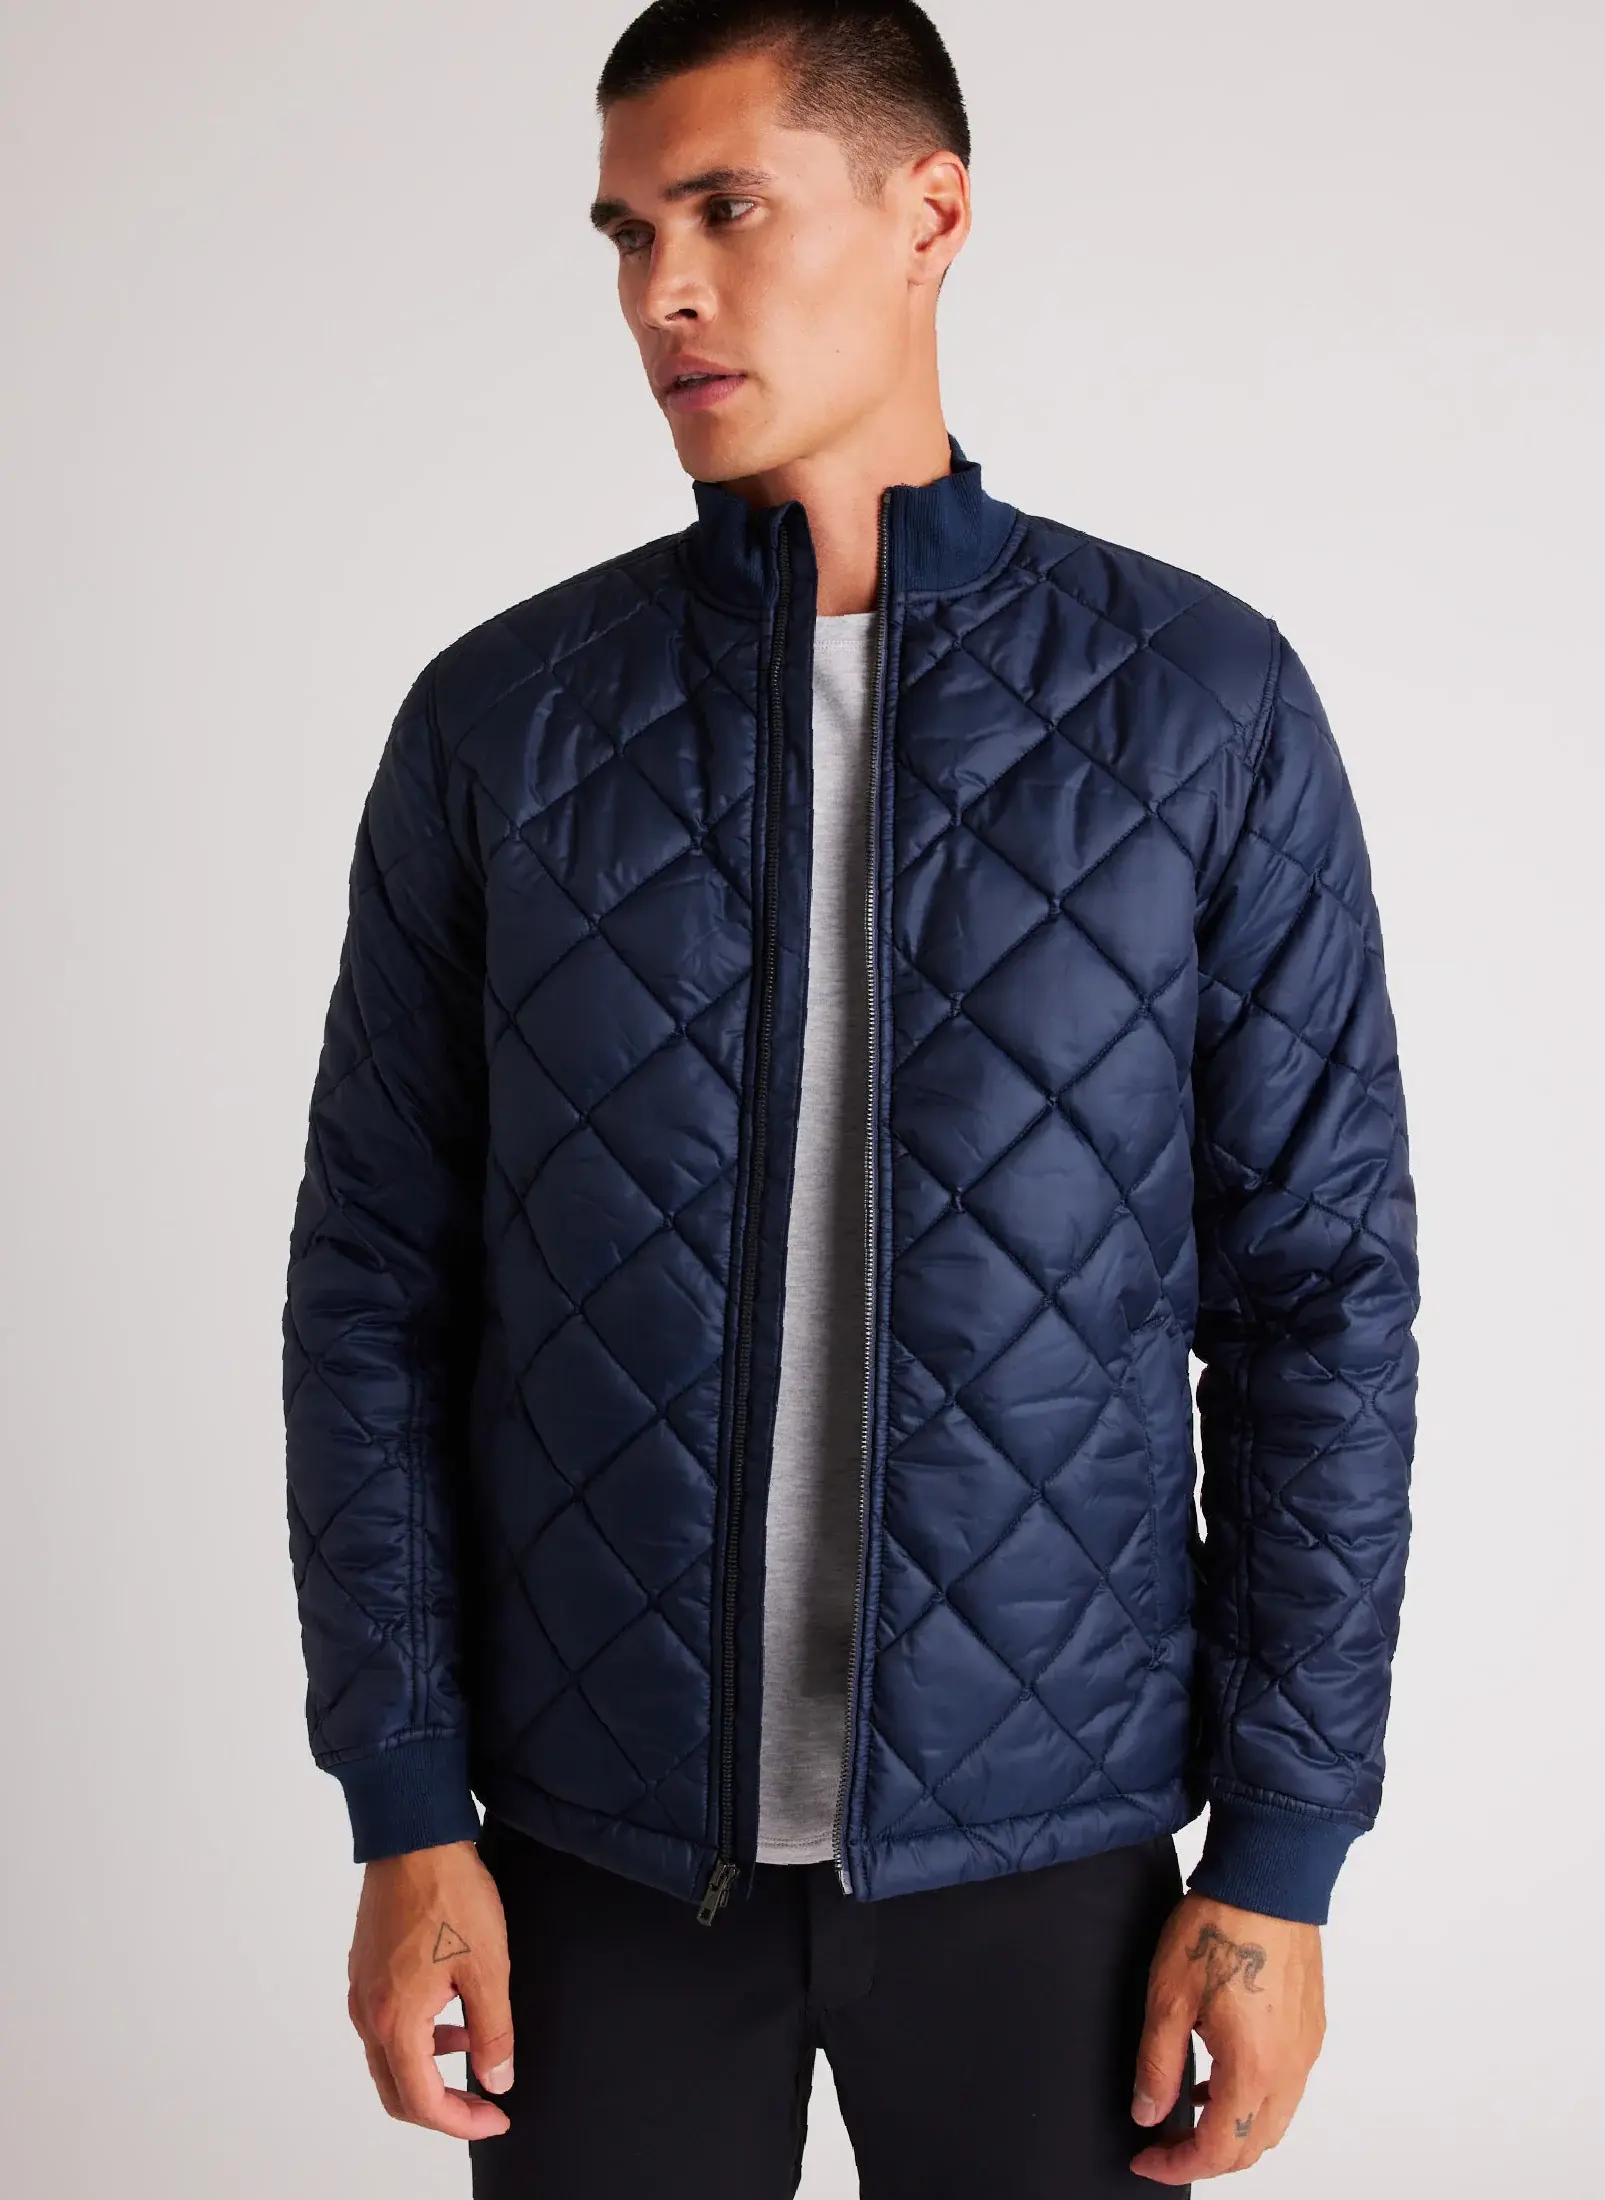 Kit And Ace Every Day Diamond Quilted Jacket. 1